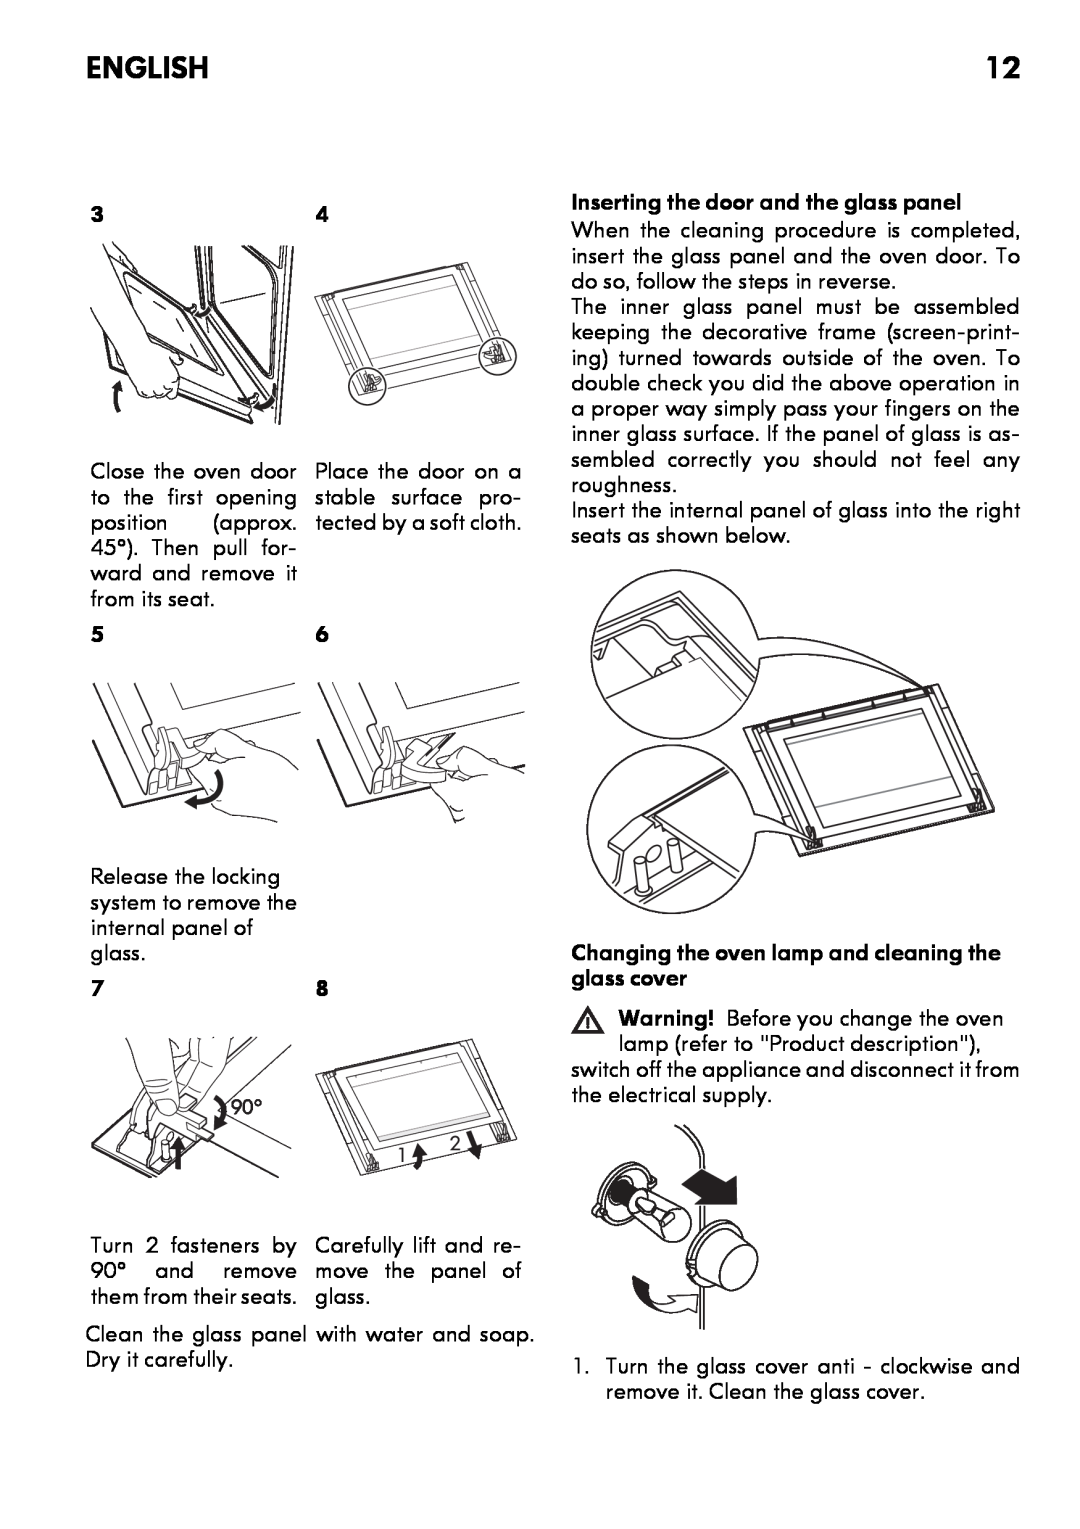 IKEA CG3 manual English, ward and remove it from its seat 